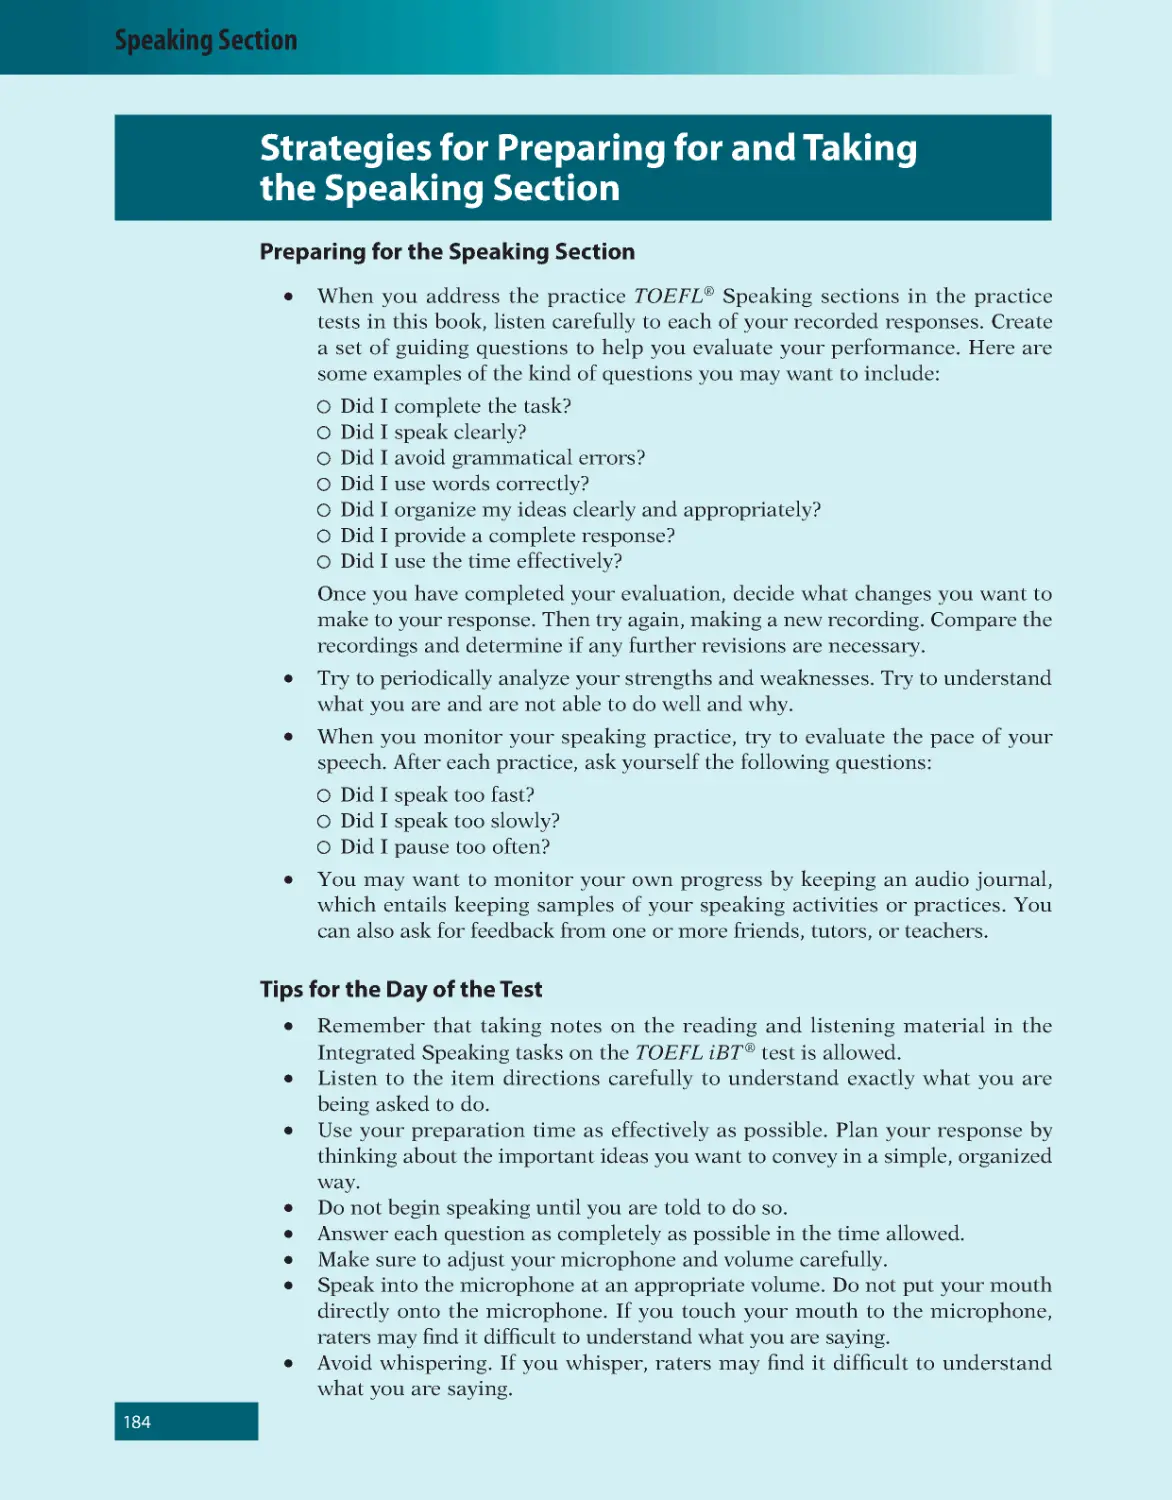 Strategies for Preparing for and Taking the Speaking Section
Tips for the Day of the Test